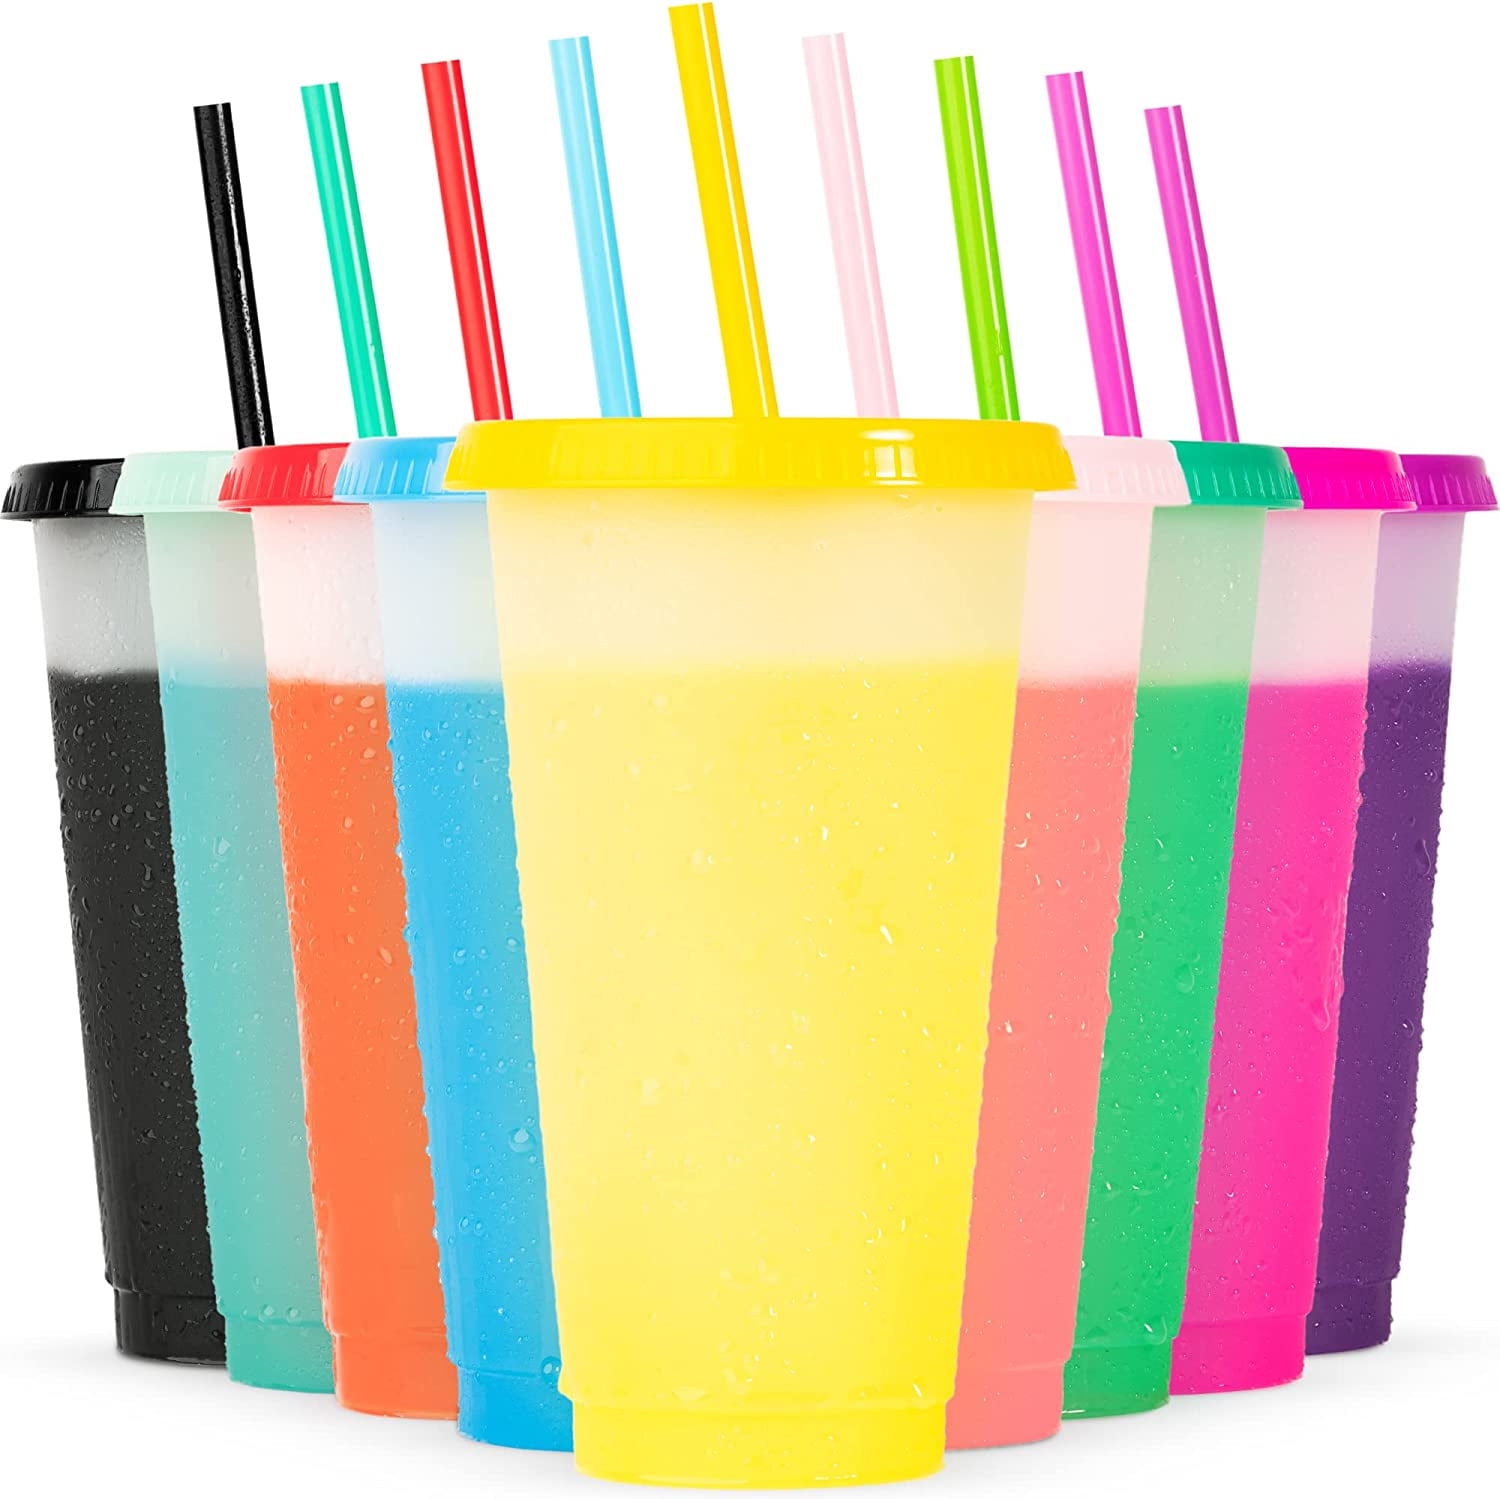 Meoky Plastic Cute Cold Cups with Lids and Straws Bulk for Iced Coffee - 6  Pack 24 oz Color Changing…See more Meoky Plastic Cute Cold Cups with Lids